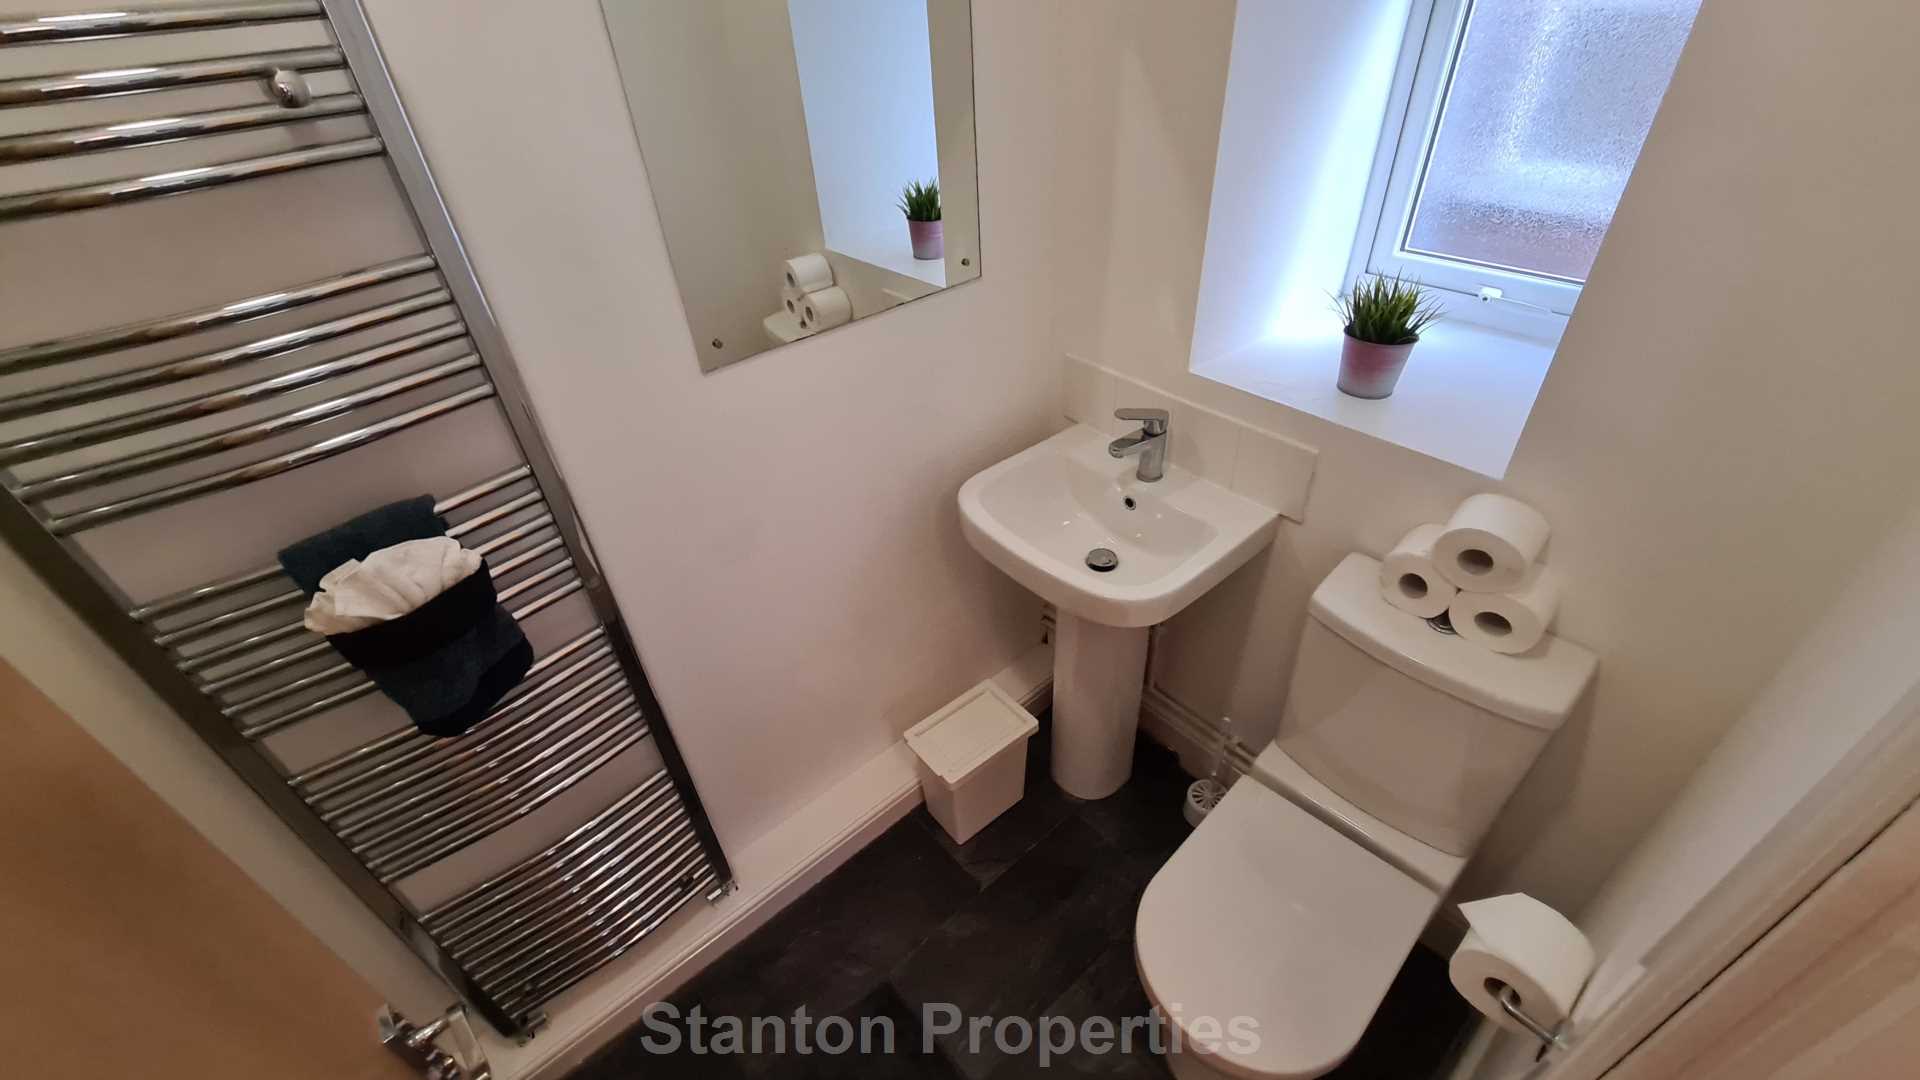 See Video Tour, £130 pppw, Albion Road, Manchester, Image 14